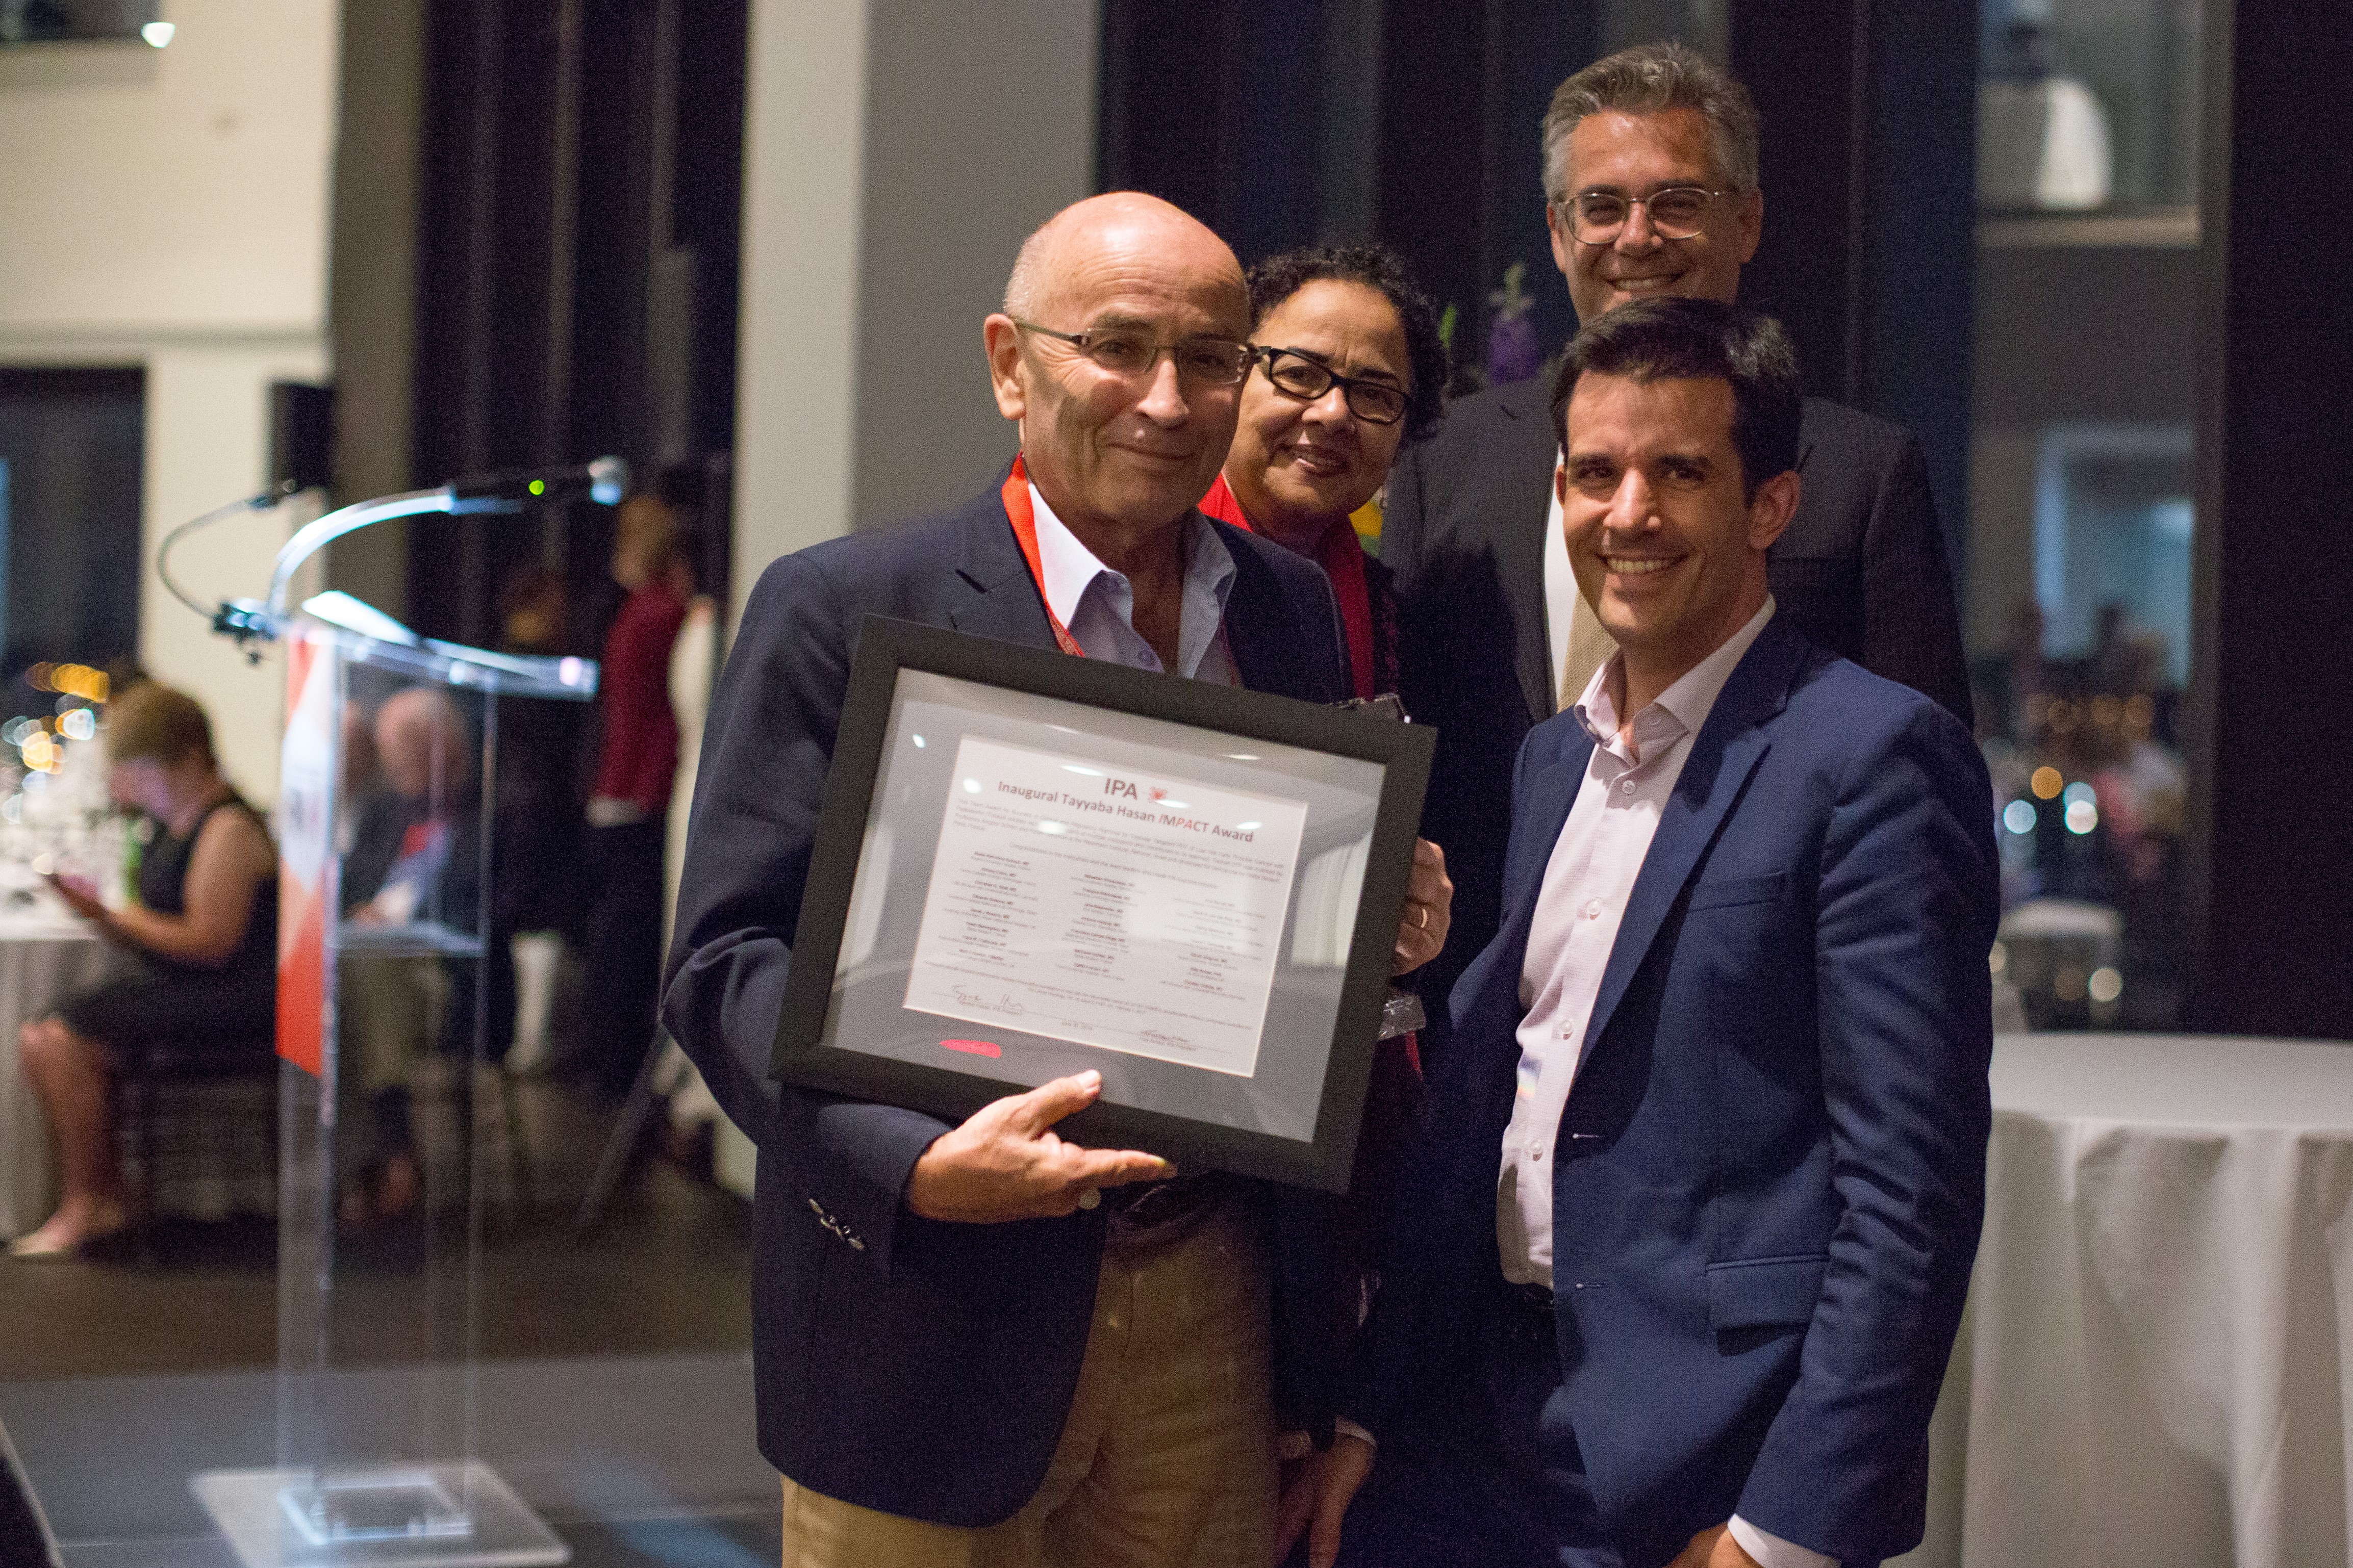 Professors Avigdor Scherz (front-left) and Yoram Salomon (front-right) receiving the Inaugural Tayyaba Hasan IMPACT Award IPA Past-President, Dr. Tayyaba Hassan (back-left), and IPA President, Dr. Luis Arnaut (back-right).